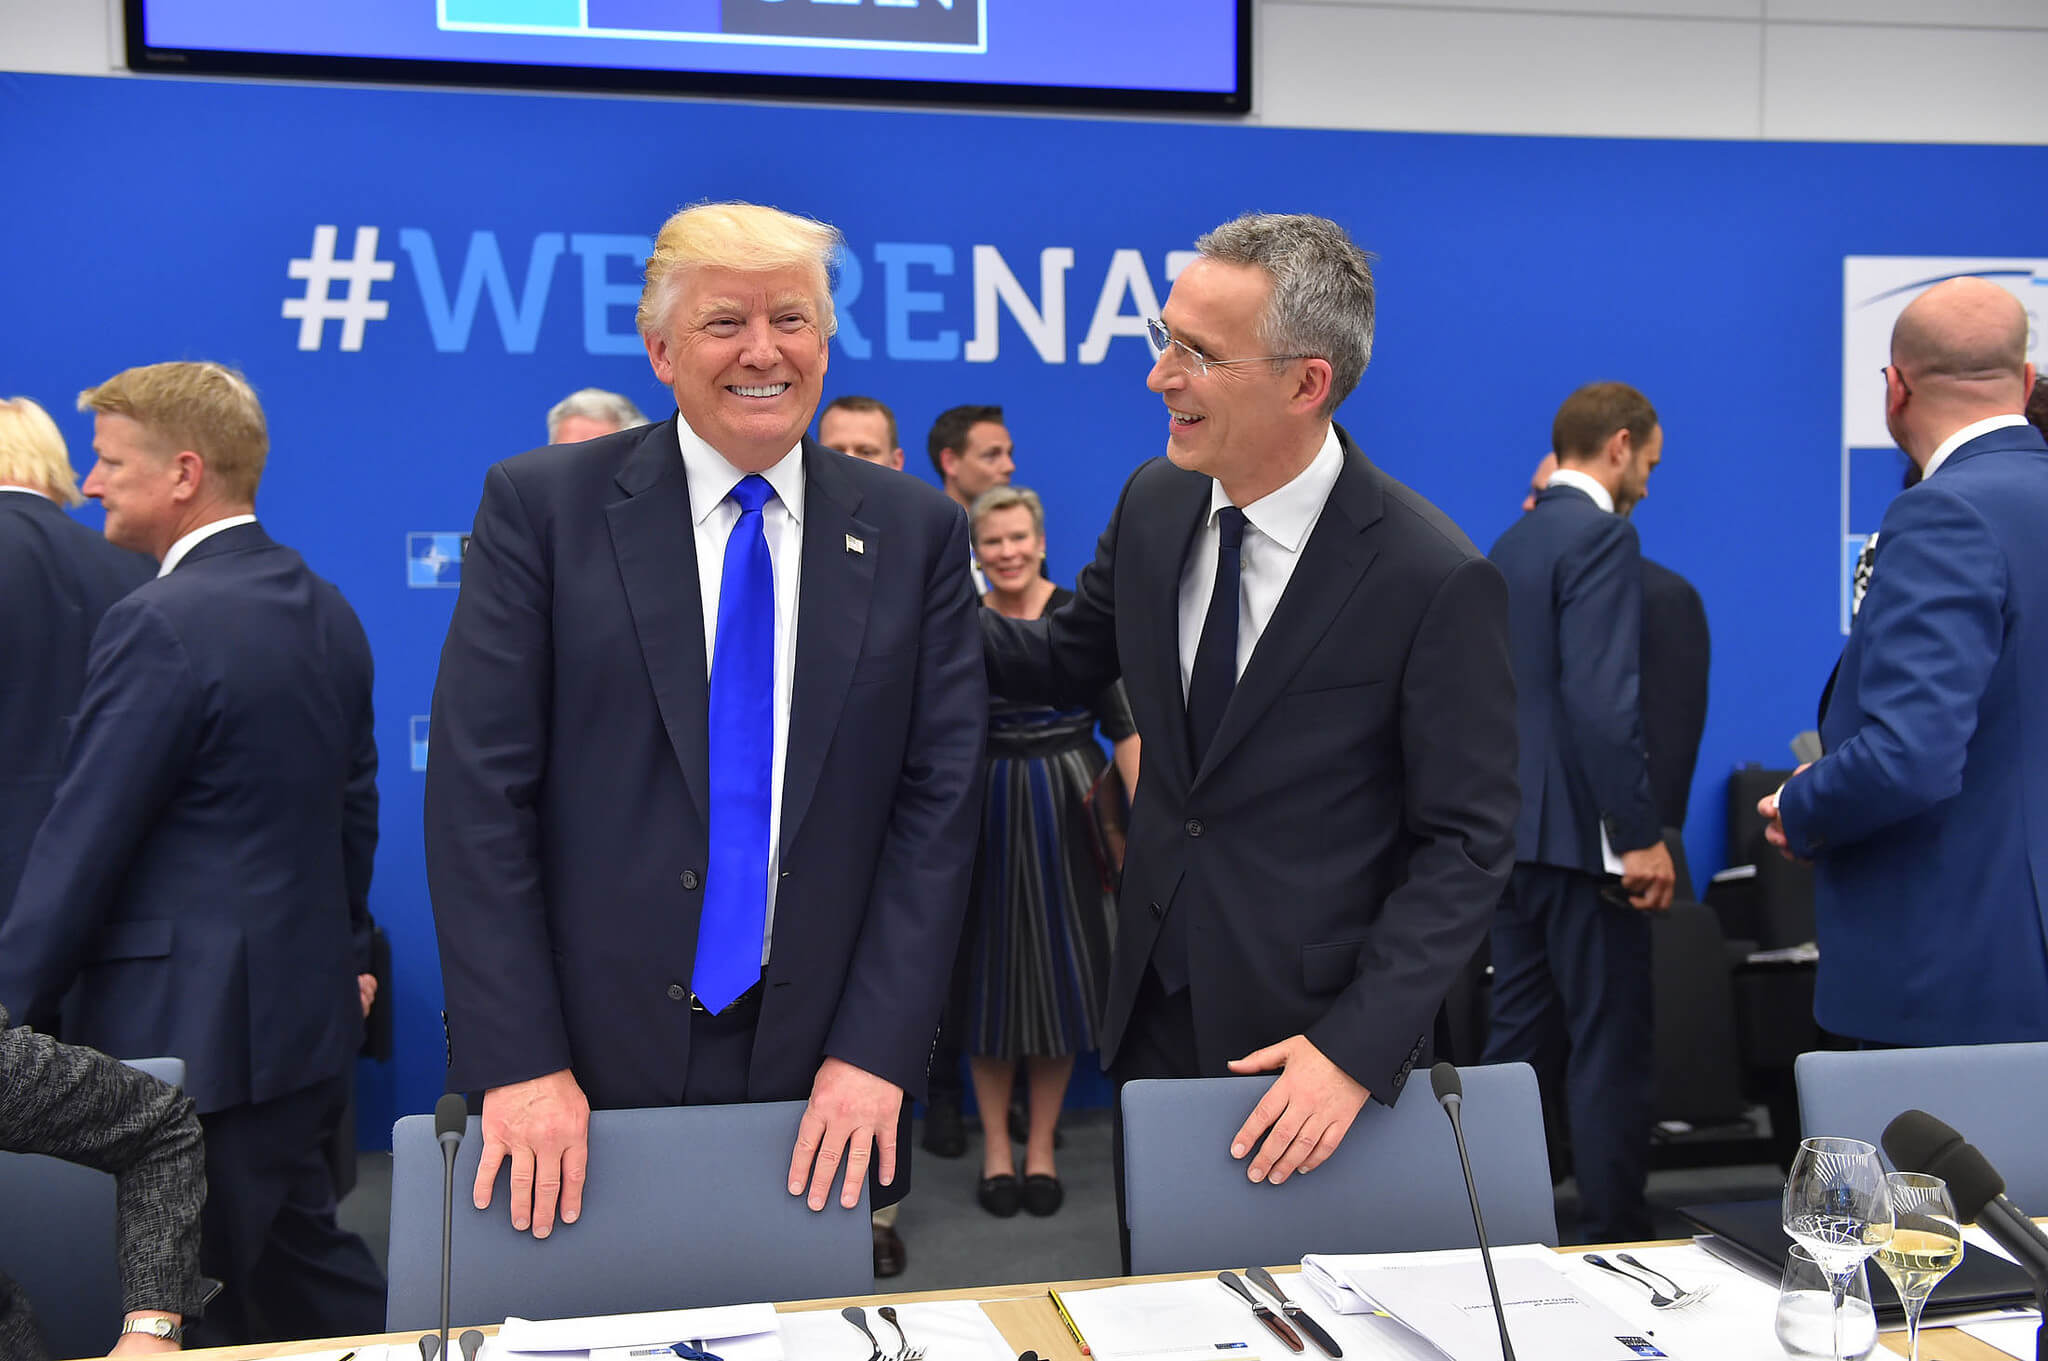 Meeting of NATO Heads of State and Government in Brussels: Donald Trump and Jens Stoltenberg. Source: NATO / Flickr. 